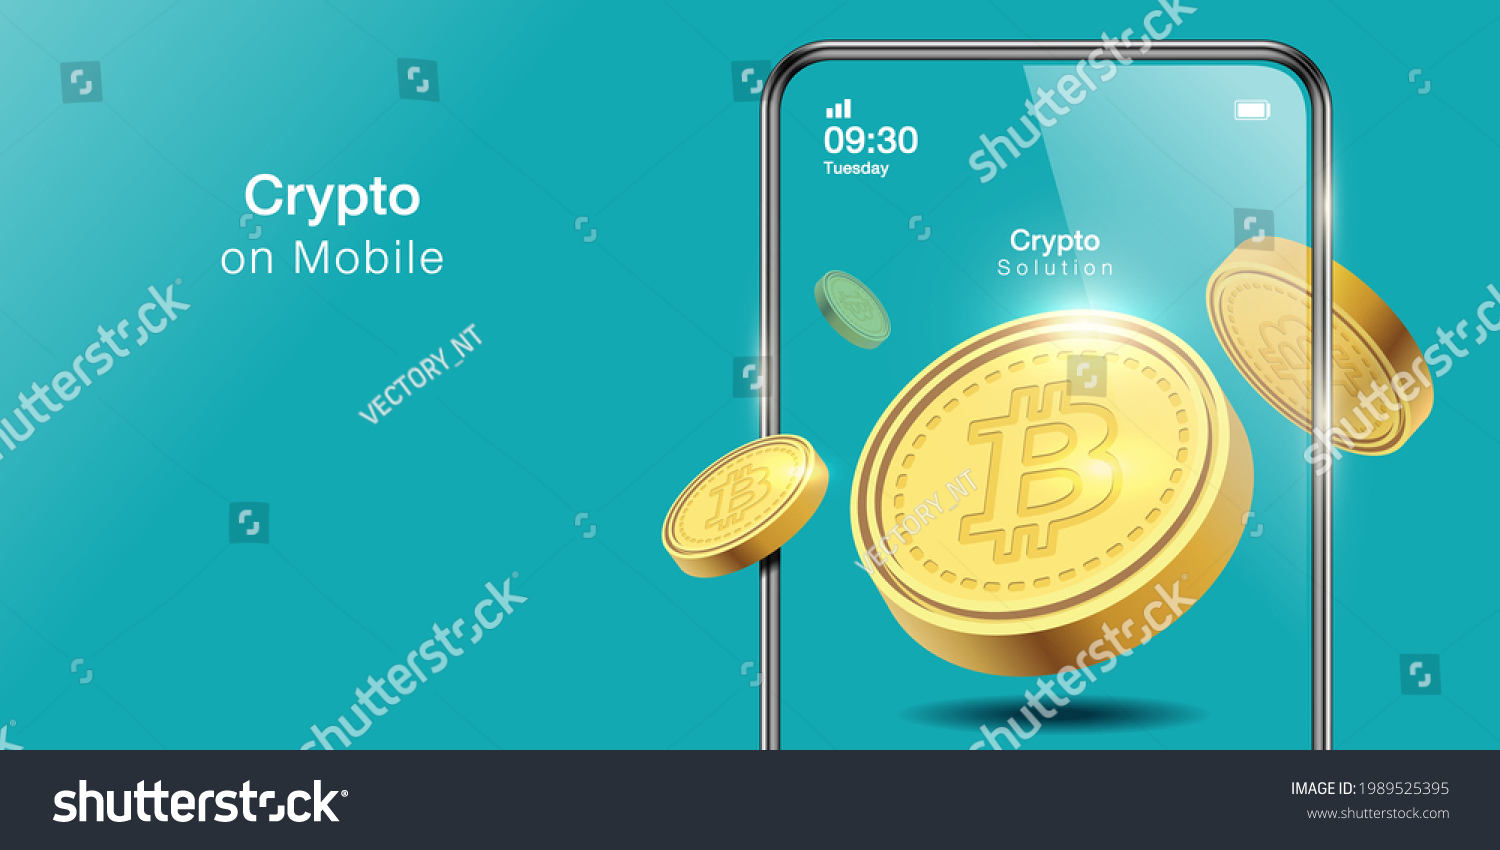 SVG of Bitcoin exchange. Flat design style web banner of blockchain technology, bitcoin, altcoins, cryptocurrency mining, finance, digital money market, cryptocoin wallet, crypto exchange. Vector svg